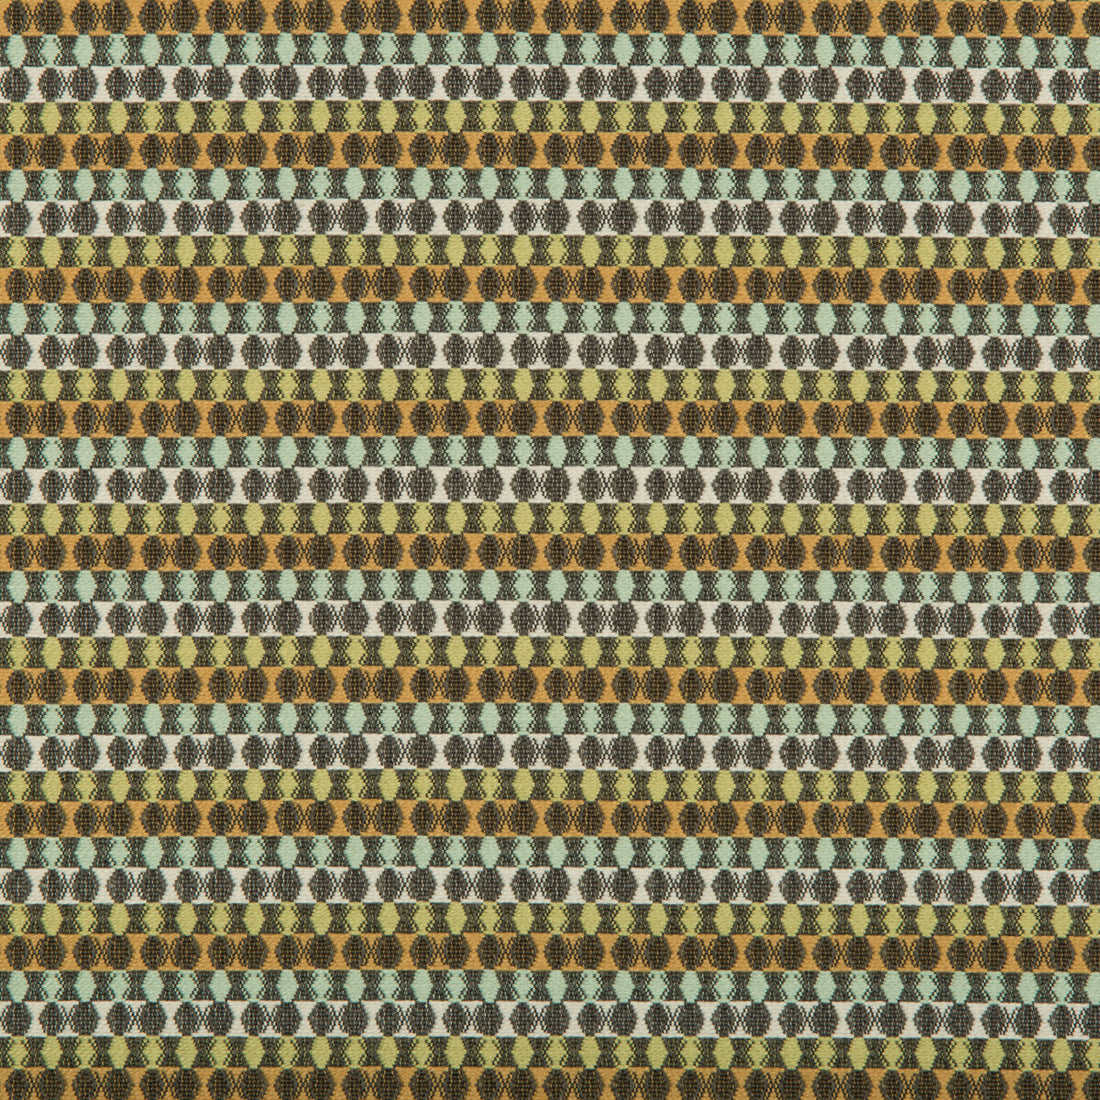 Role Model fabric in hillside color - pattern 35092.23.0 - by Kravet Contract in the Gis Crypton collection